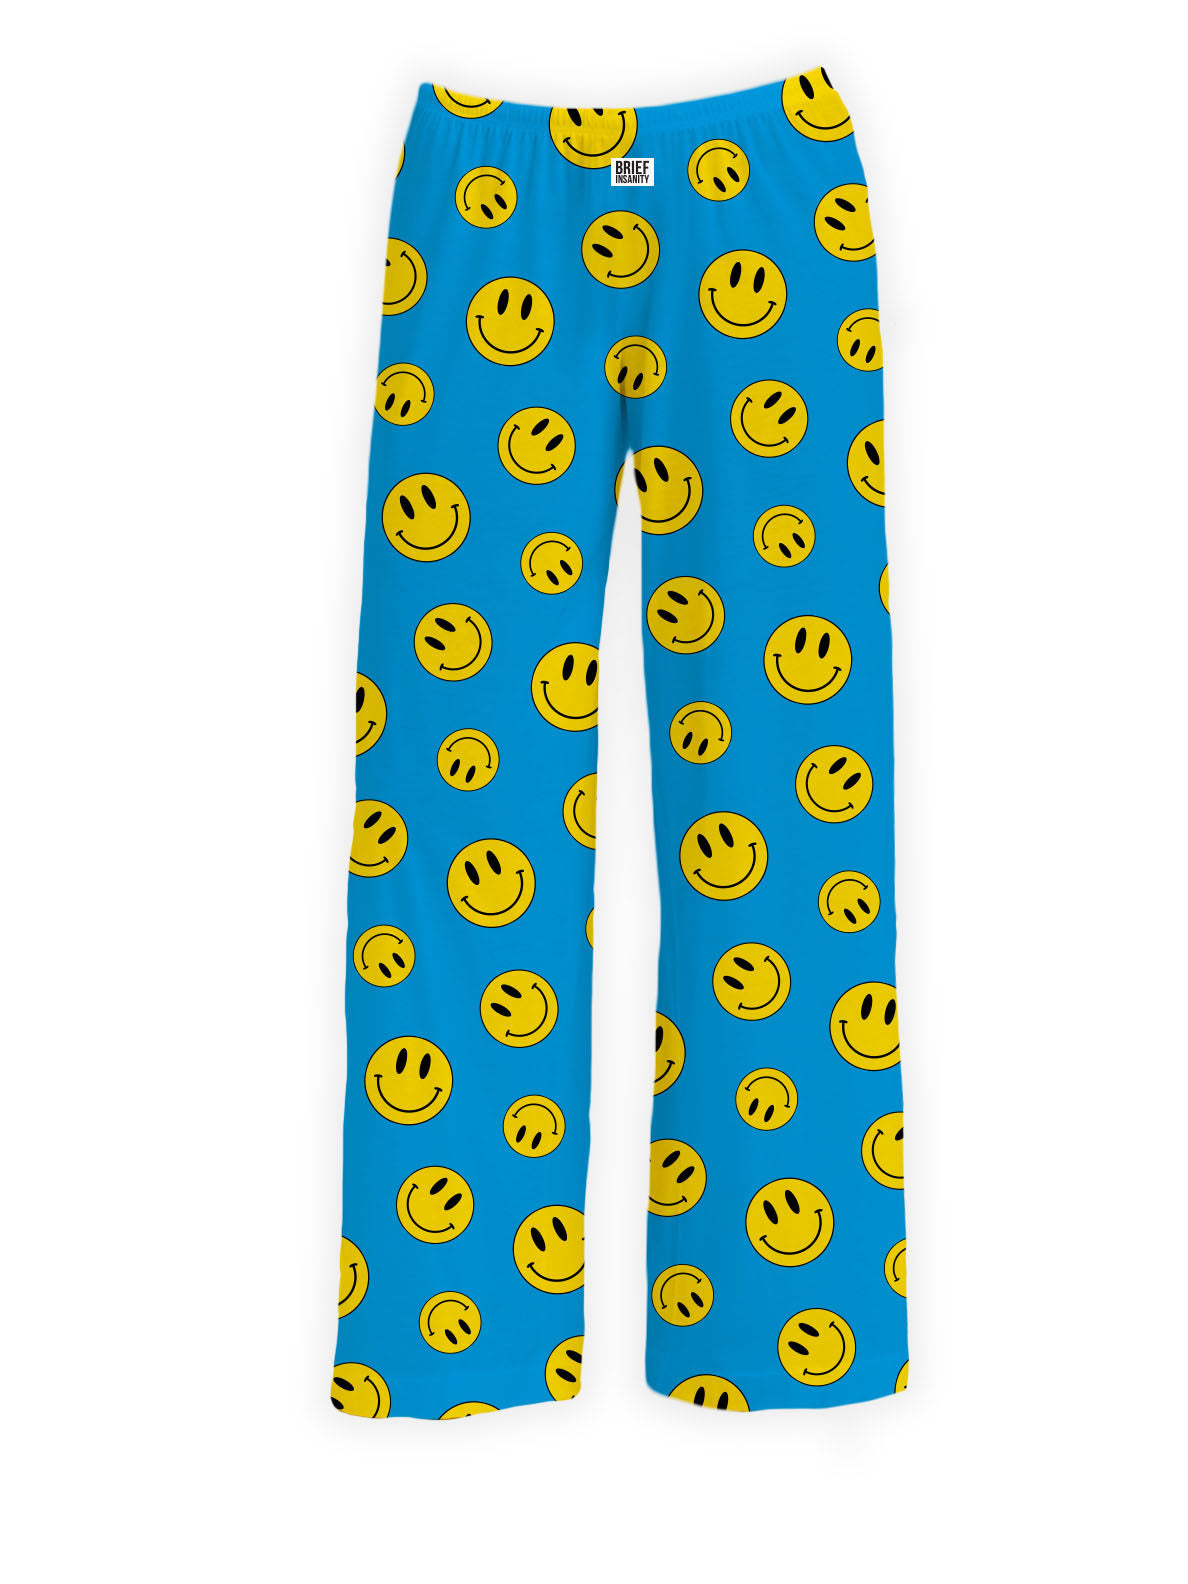 BRIEF INSANITY Smiley Face Pattern Pajama Lounge Pants